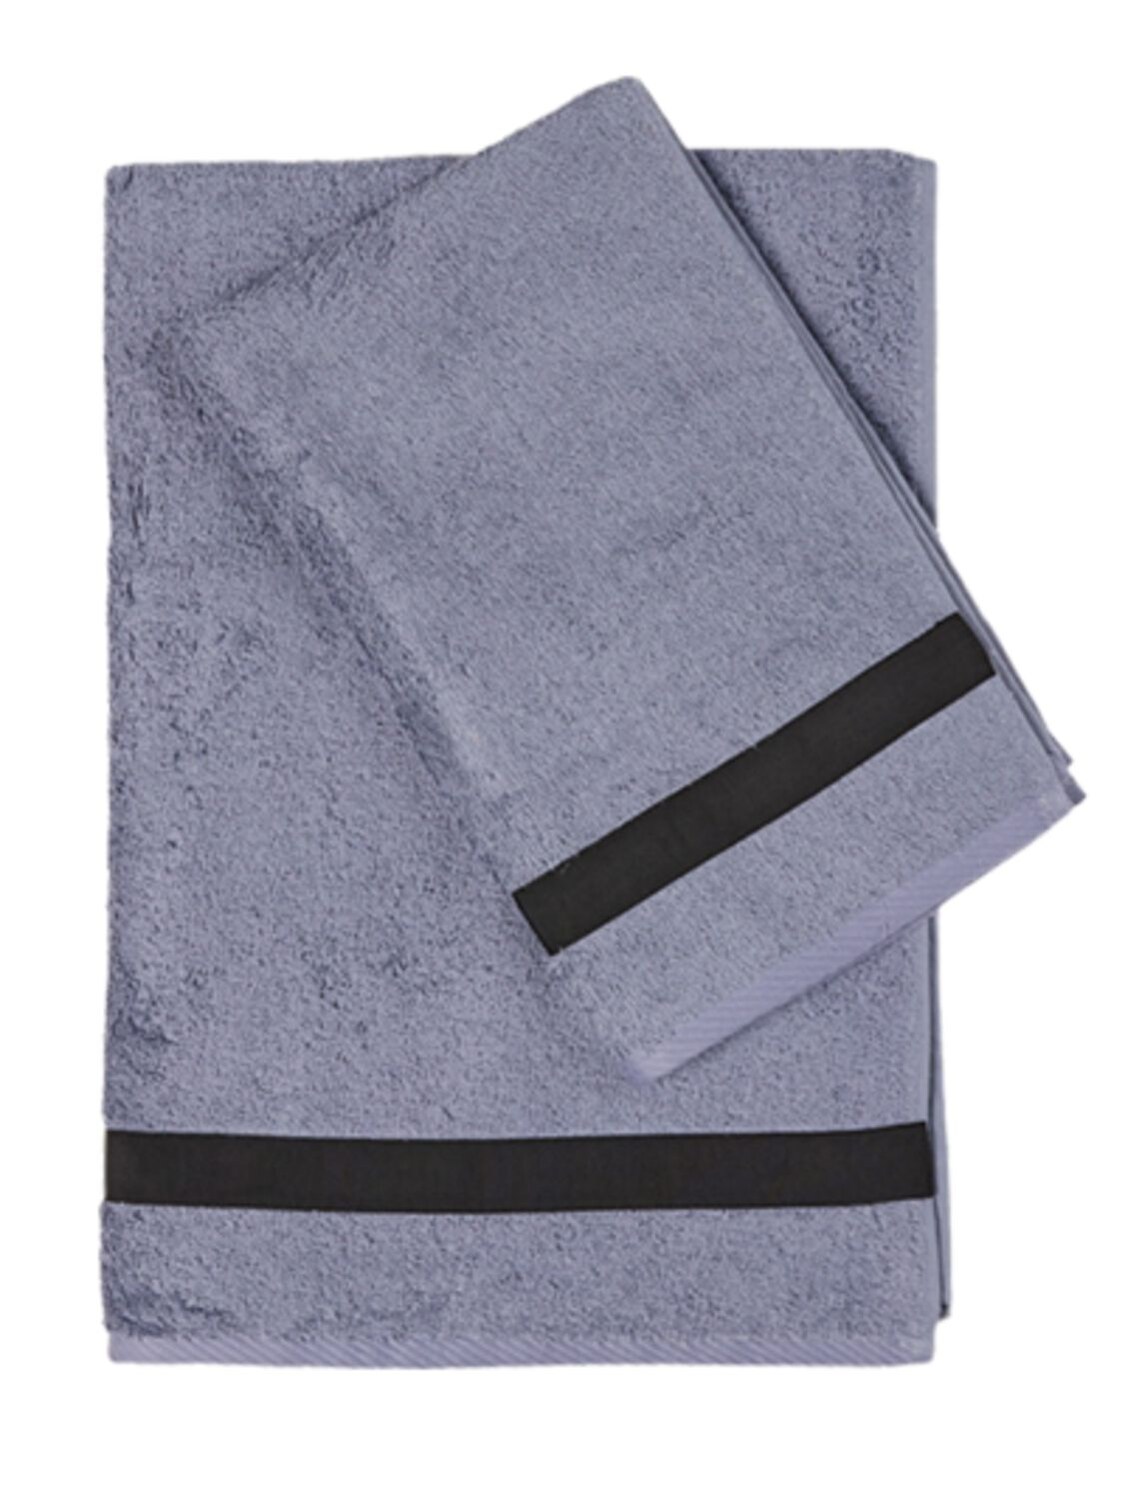 Alessandro Di Marco Set Of 2 Cotton Terrycloth Towels In Blue